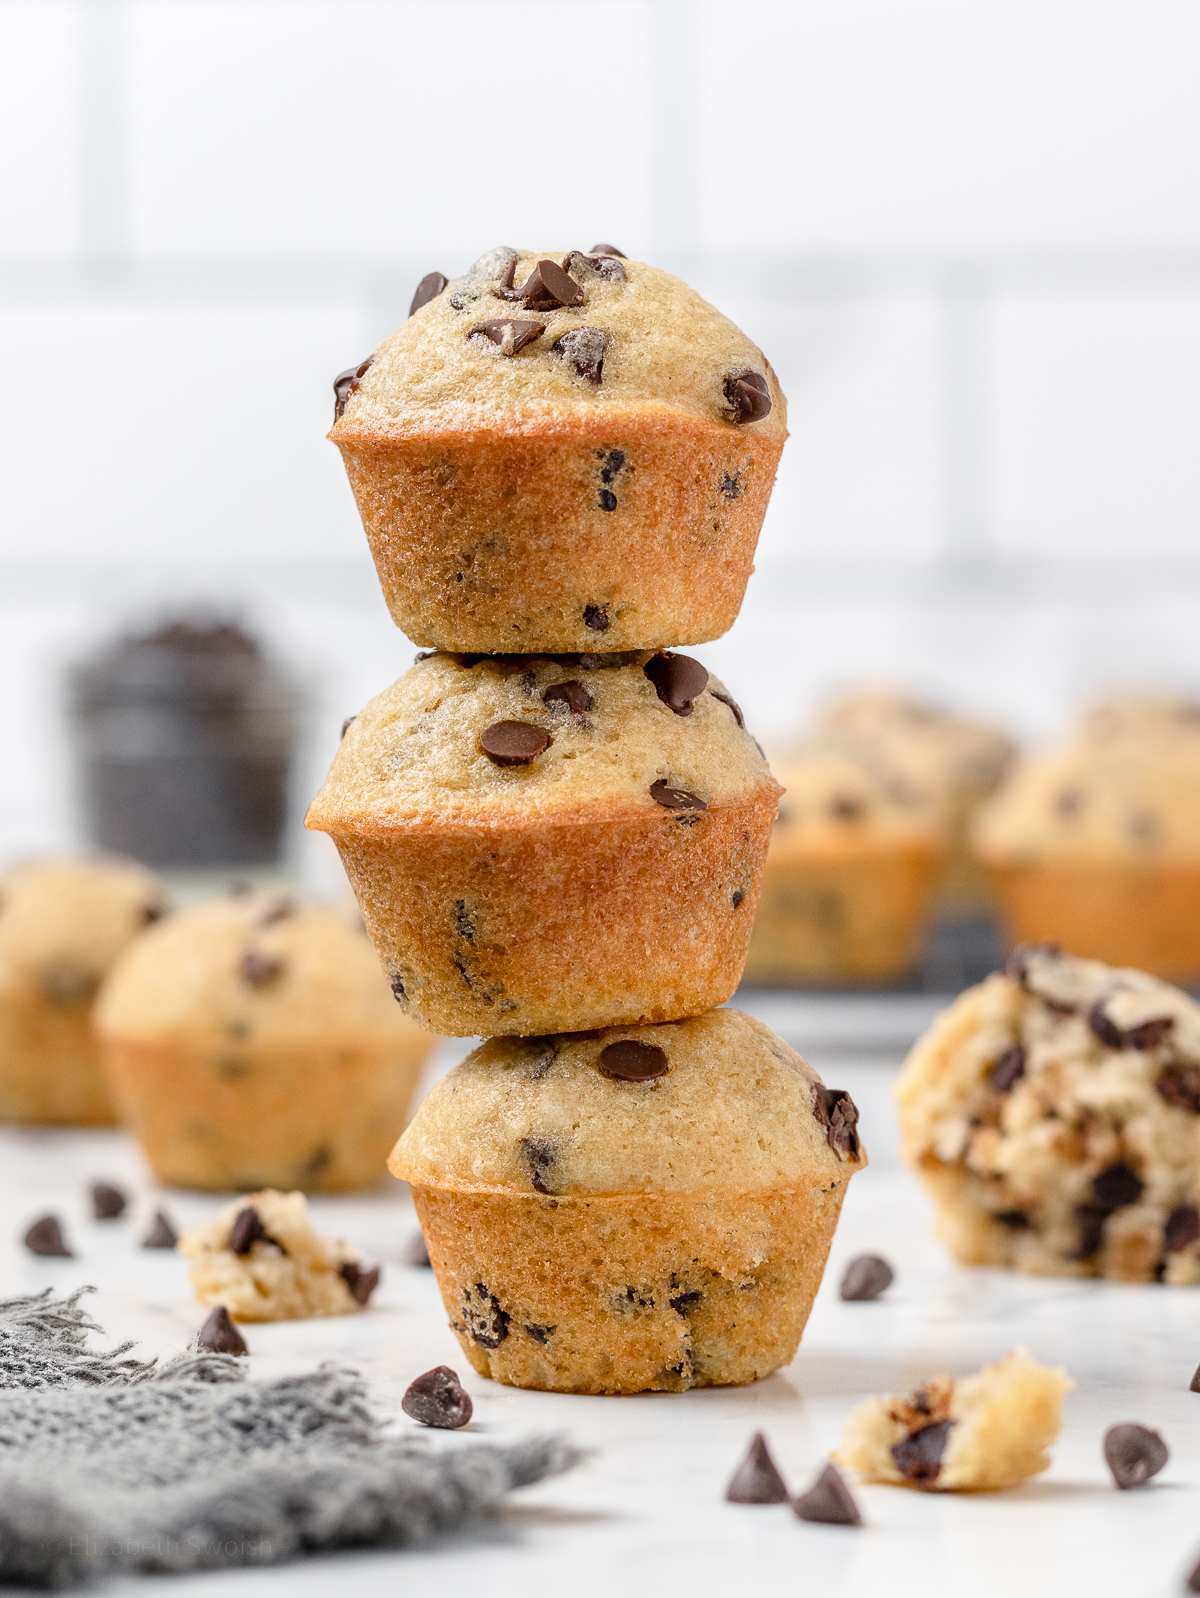 Stack of 3 mini muffins surrounded by more muffins and mini semi-sweet chocolate chips.